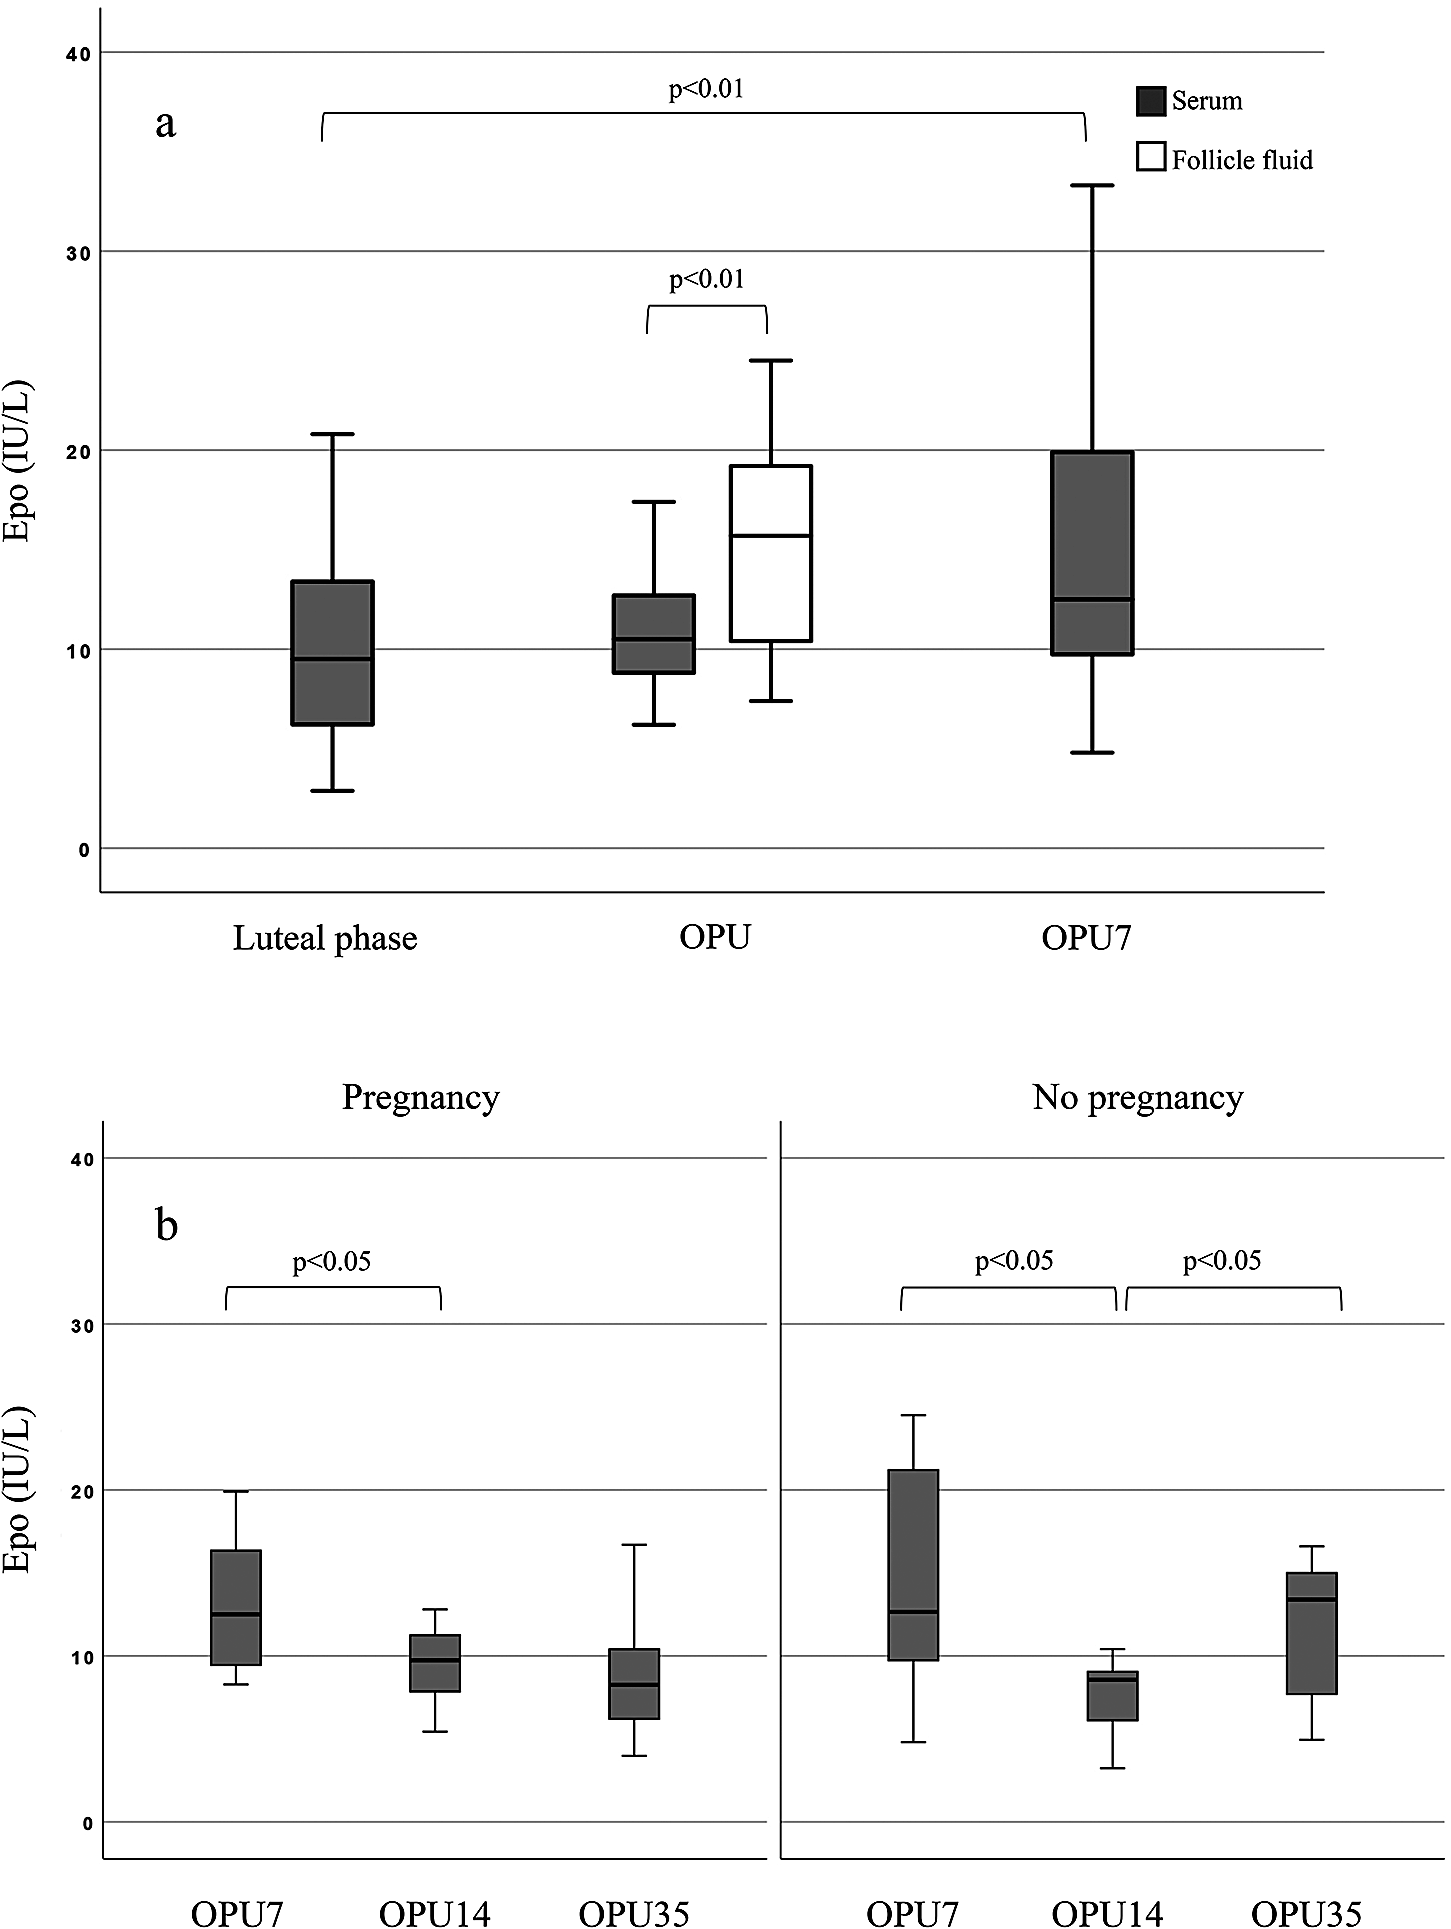 Serum erythropoietin level is increased during stimulation for IVF but not in OHSS